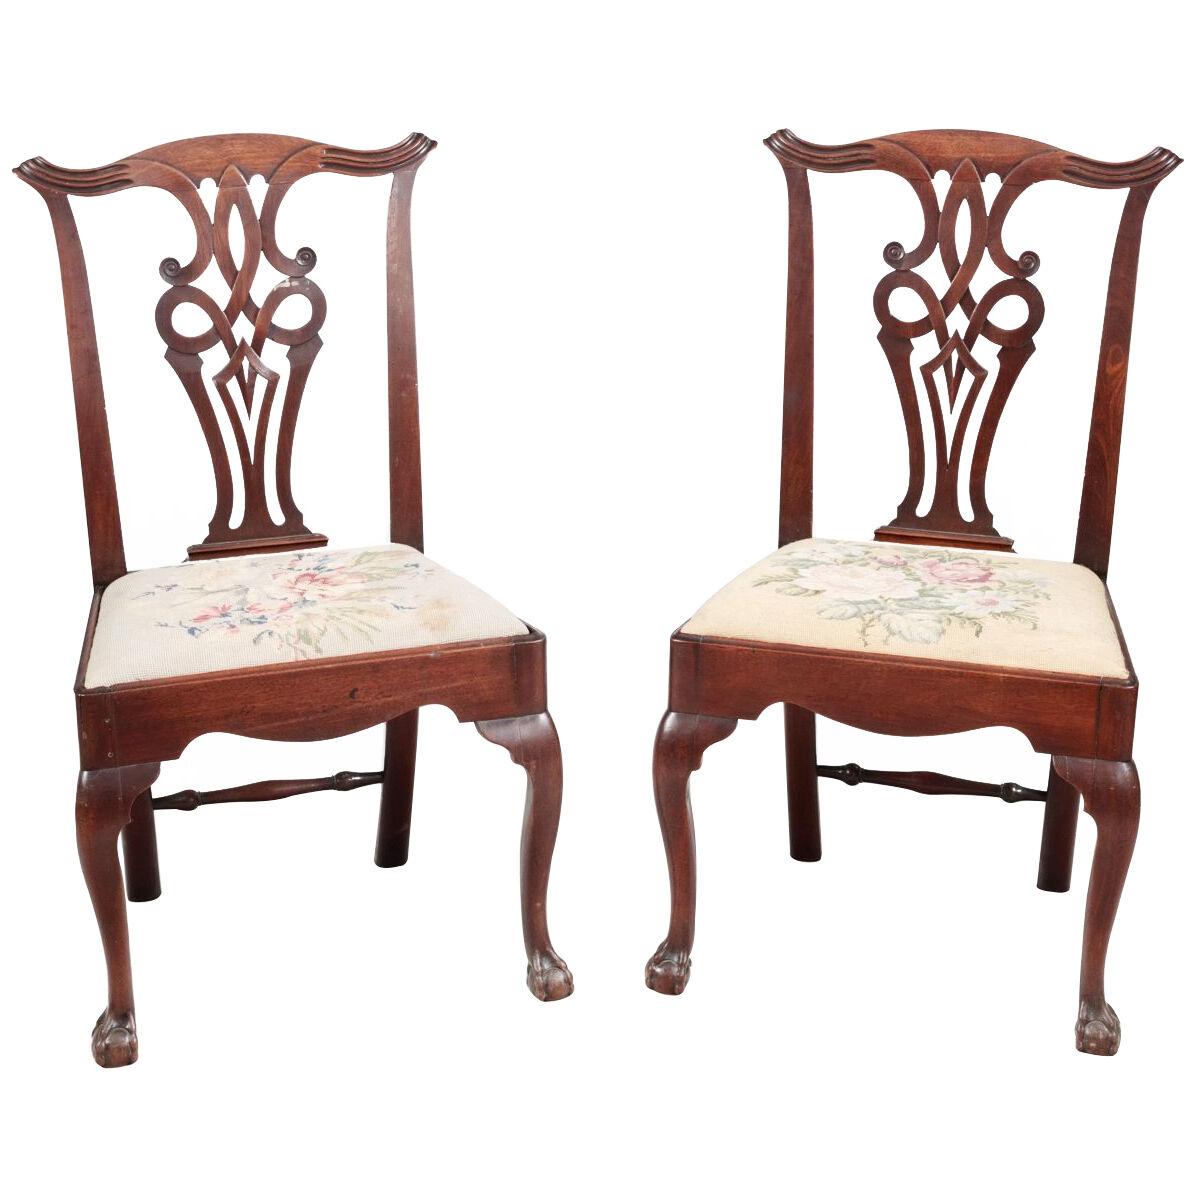 Pair of 18th Century Mahogany Chippendale Style Chairs